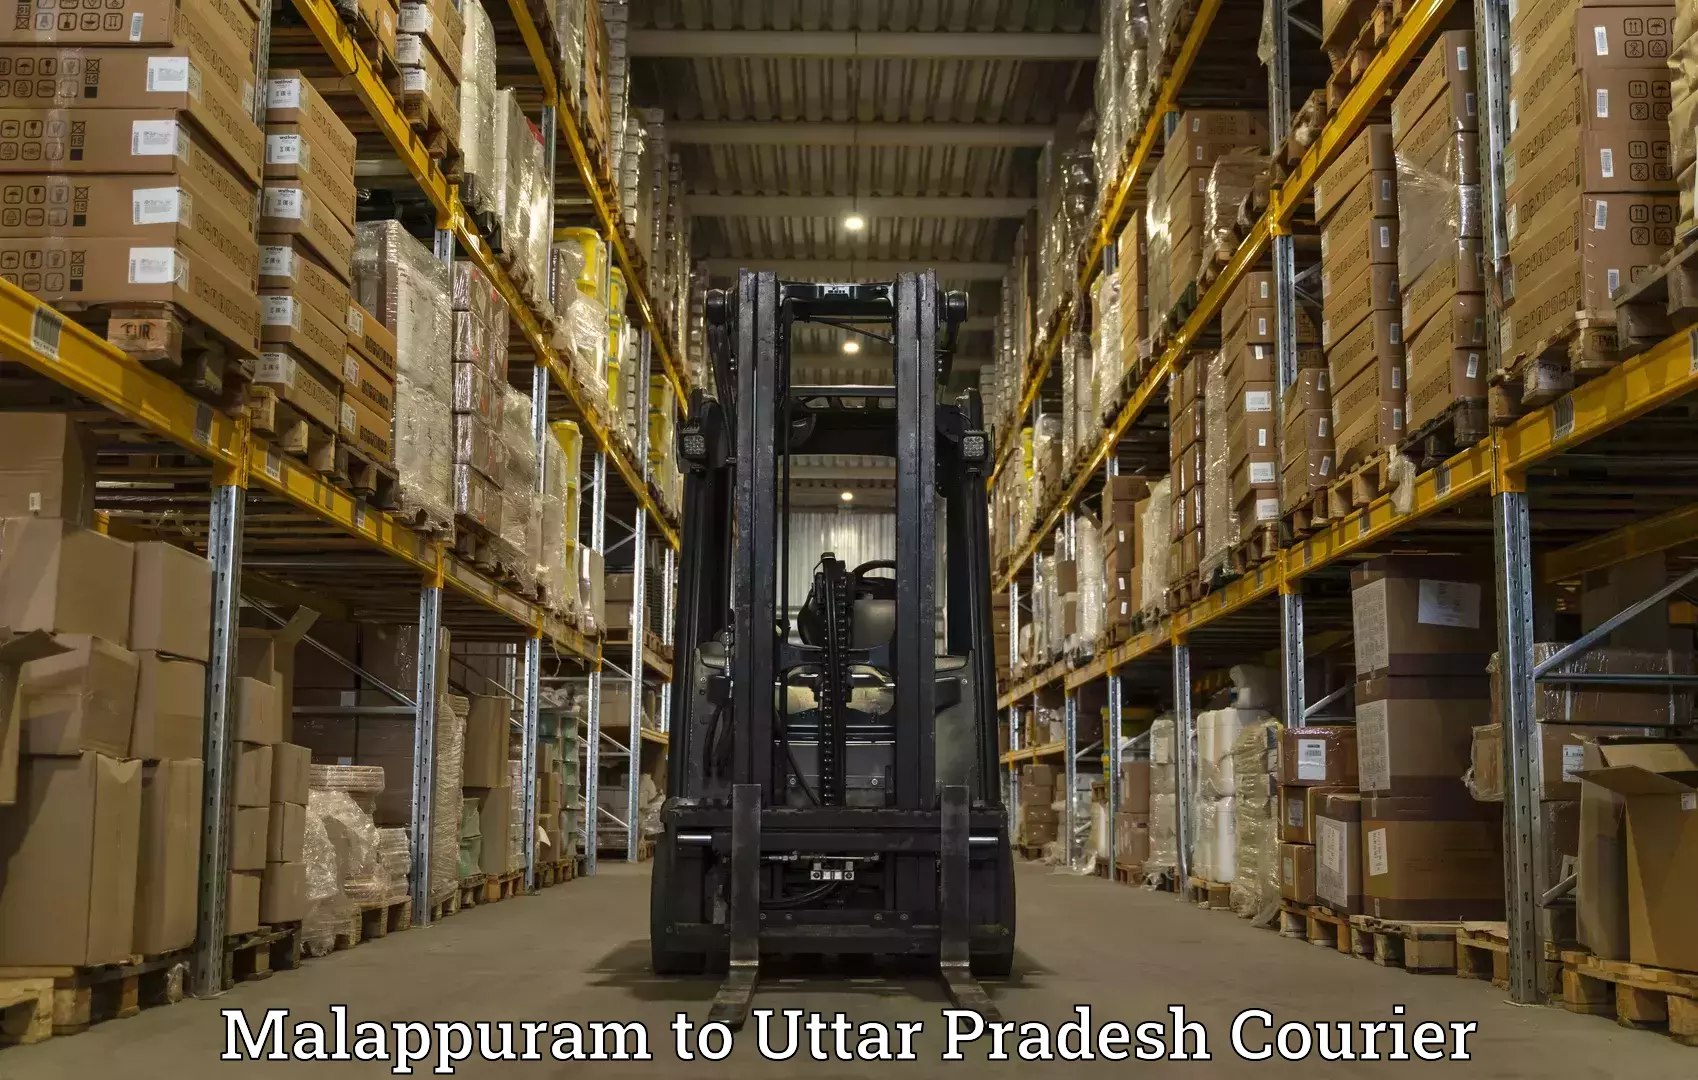 Subscription-based courier Malappuram to Fatehpur